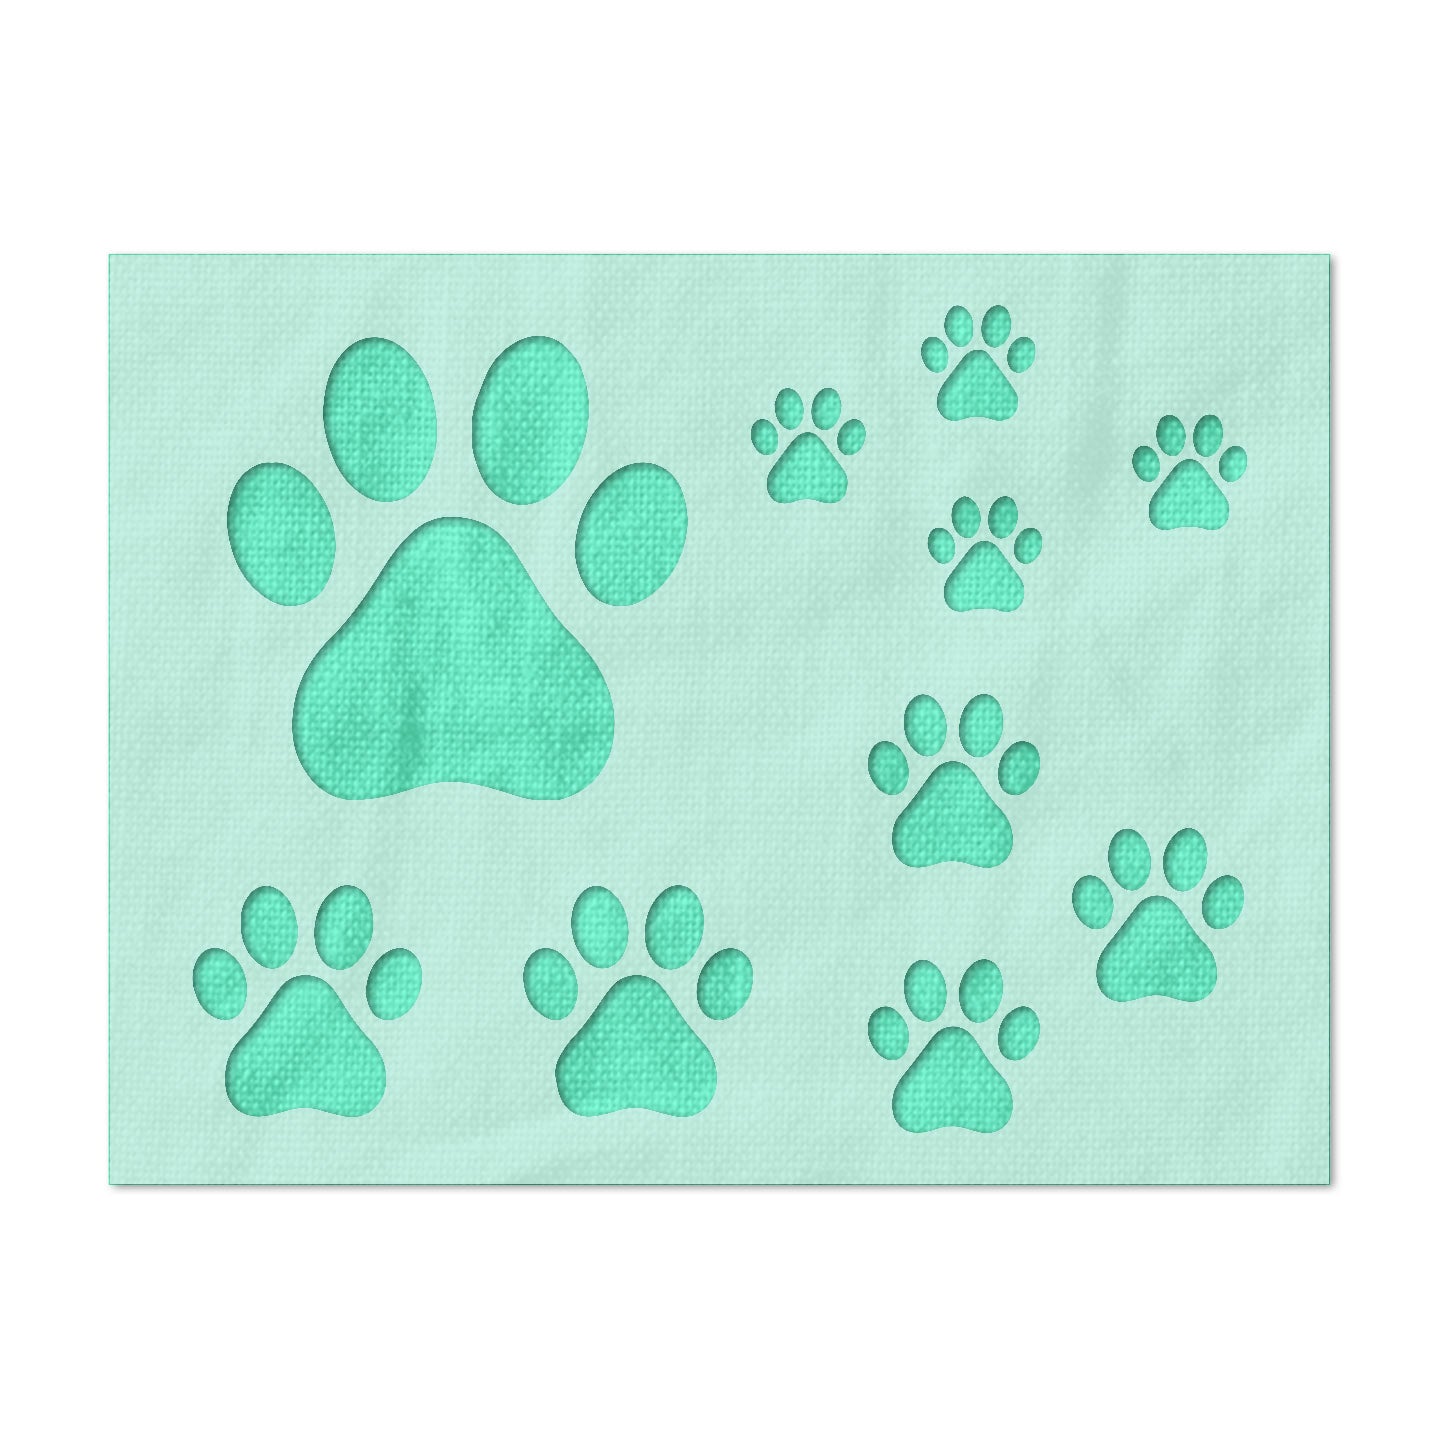 Dog and cat paw prints stencil